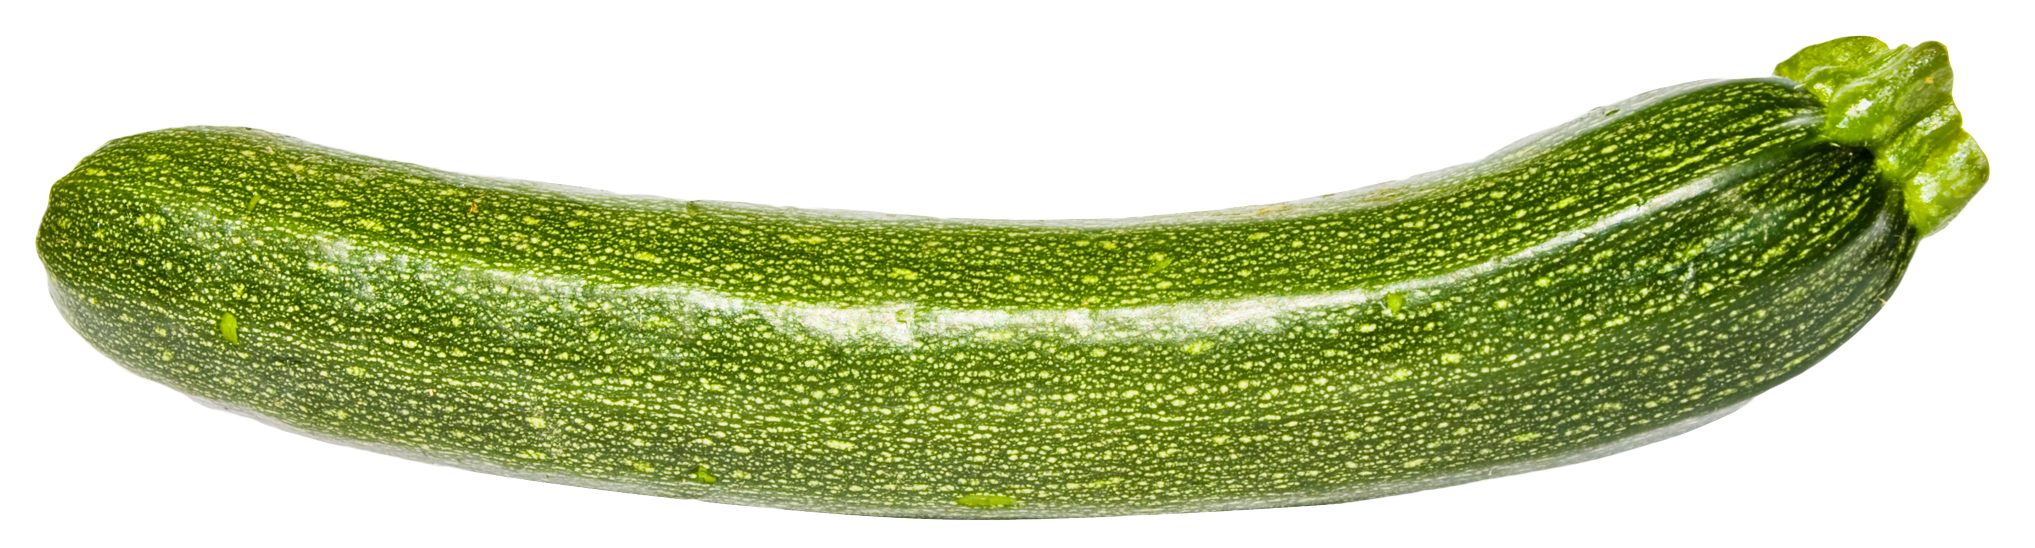 Zucchini clipart vegetable. Png image purepng free